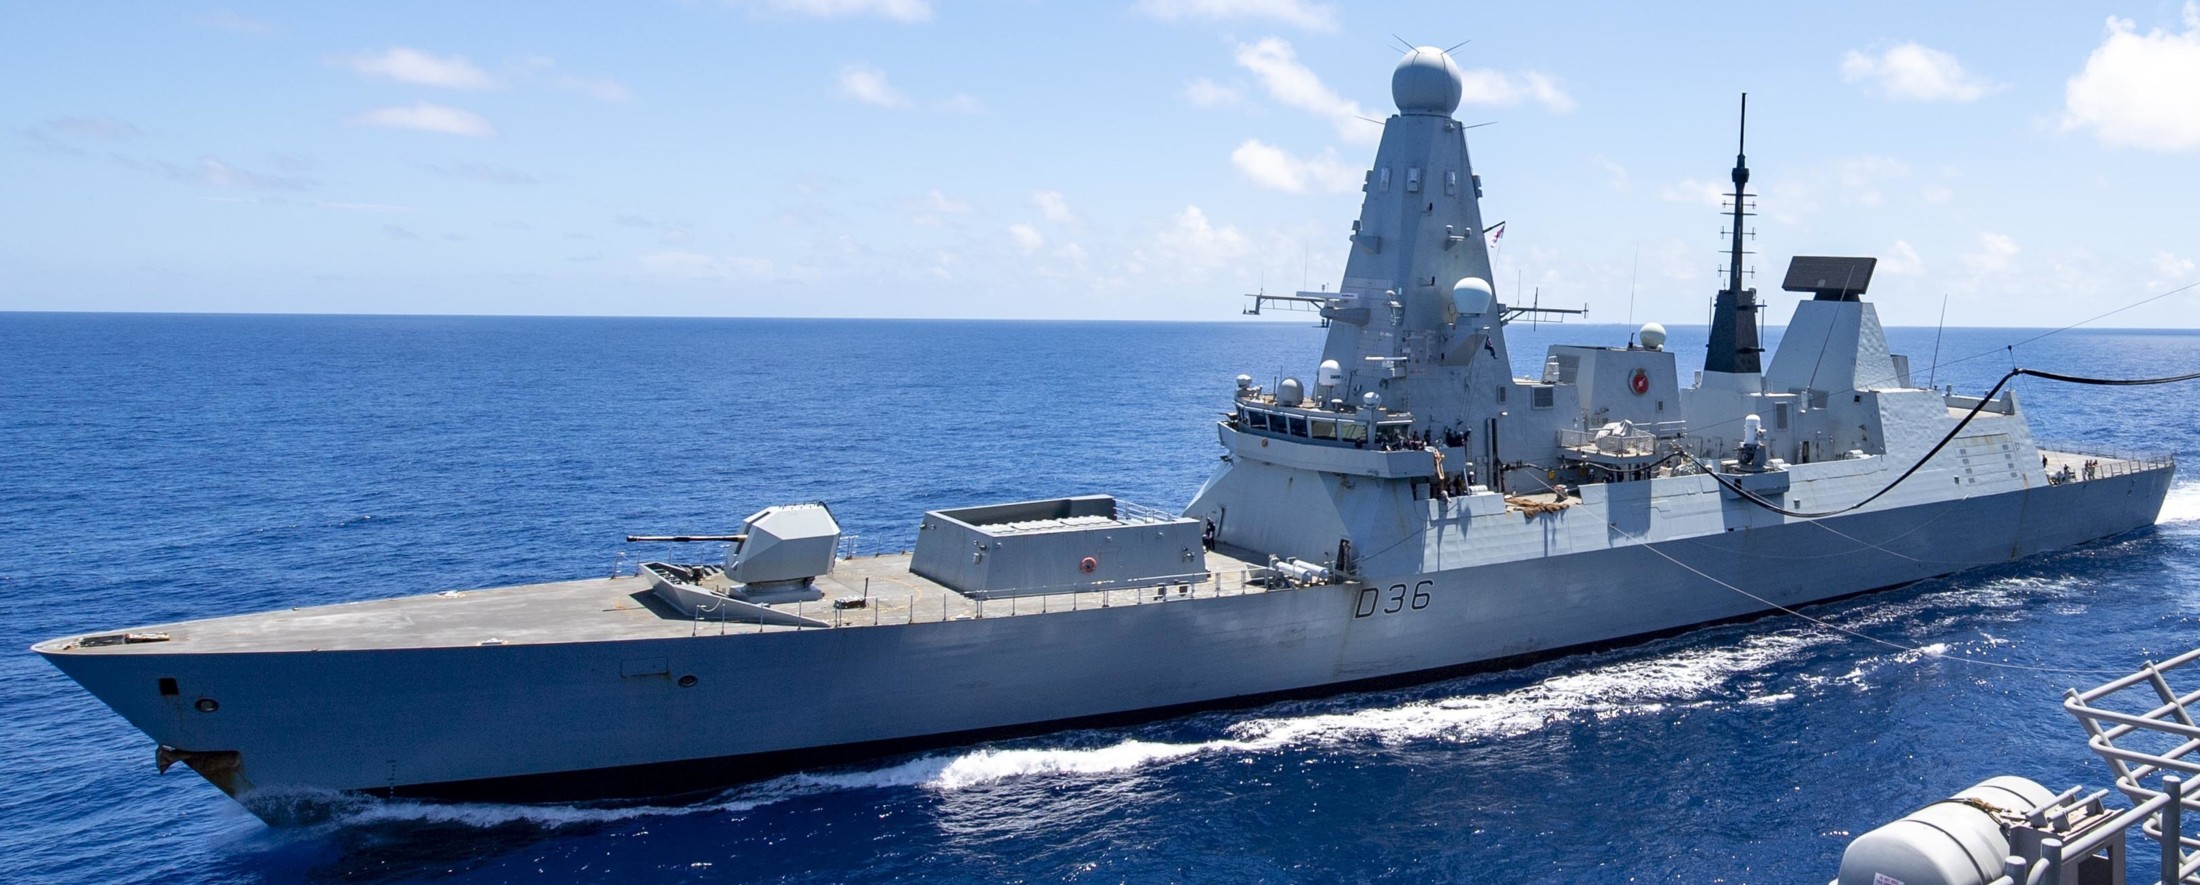 d36 hms defender d-36 type 45 daring class guided missile destroyer ddg royal navy sea viper 43